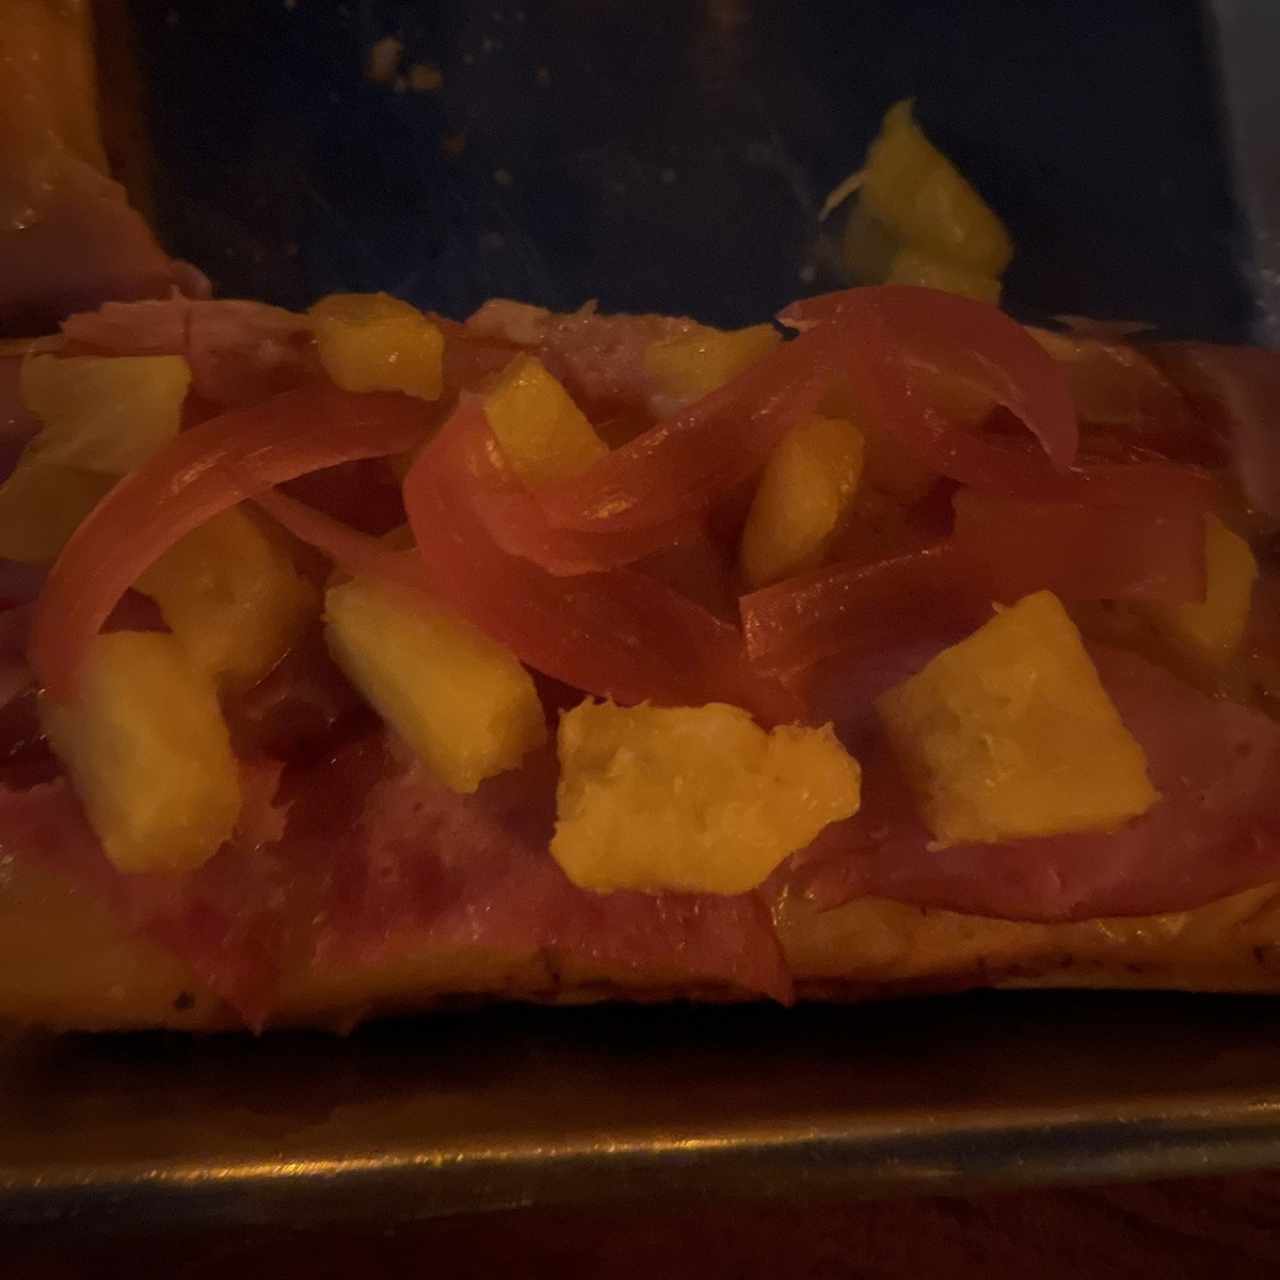 Pizza - Pineapple Express